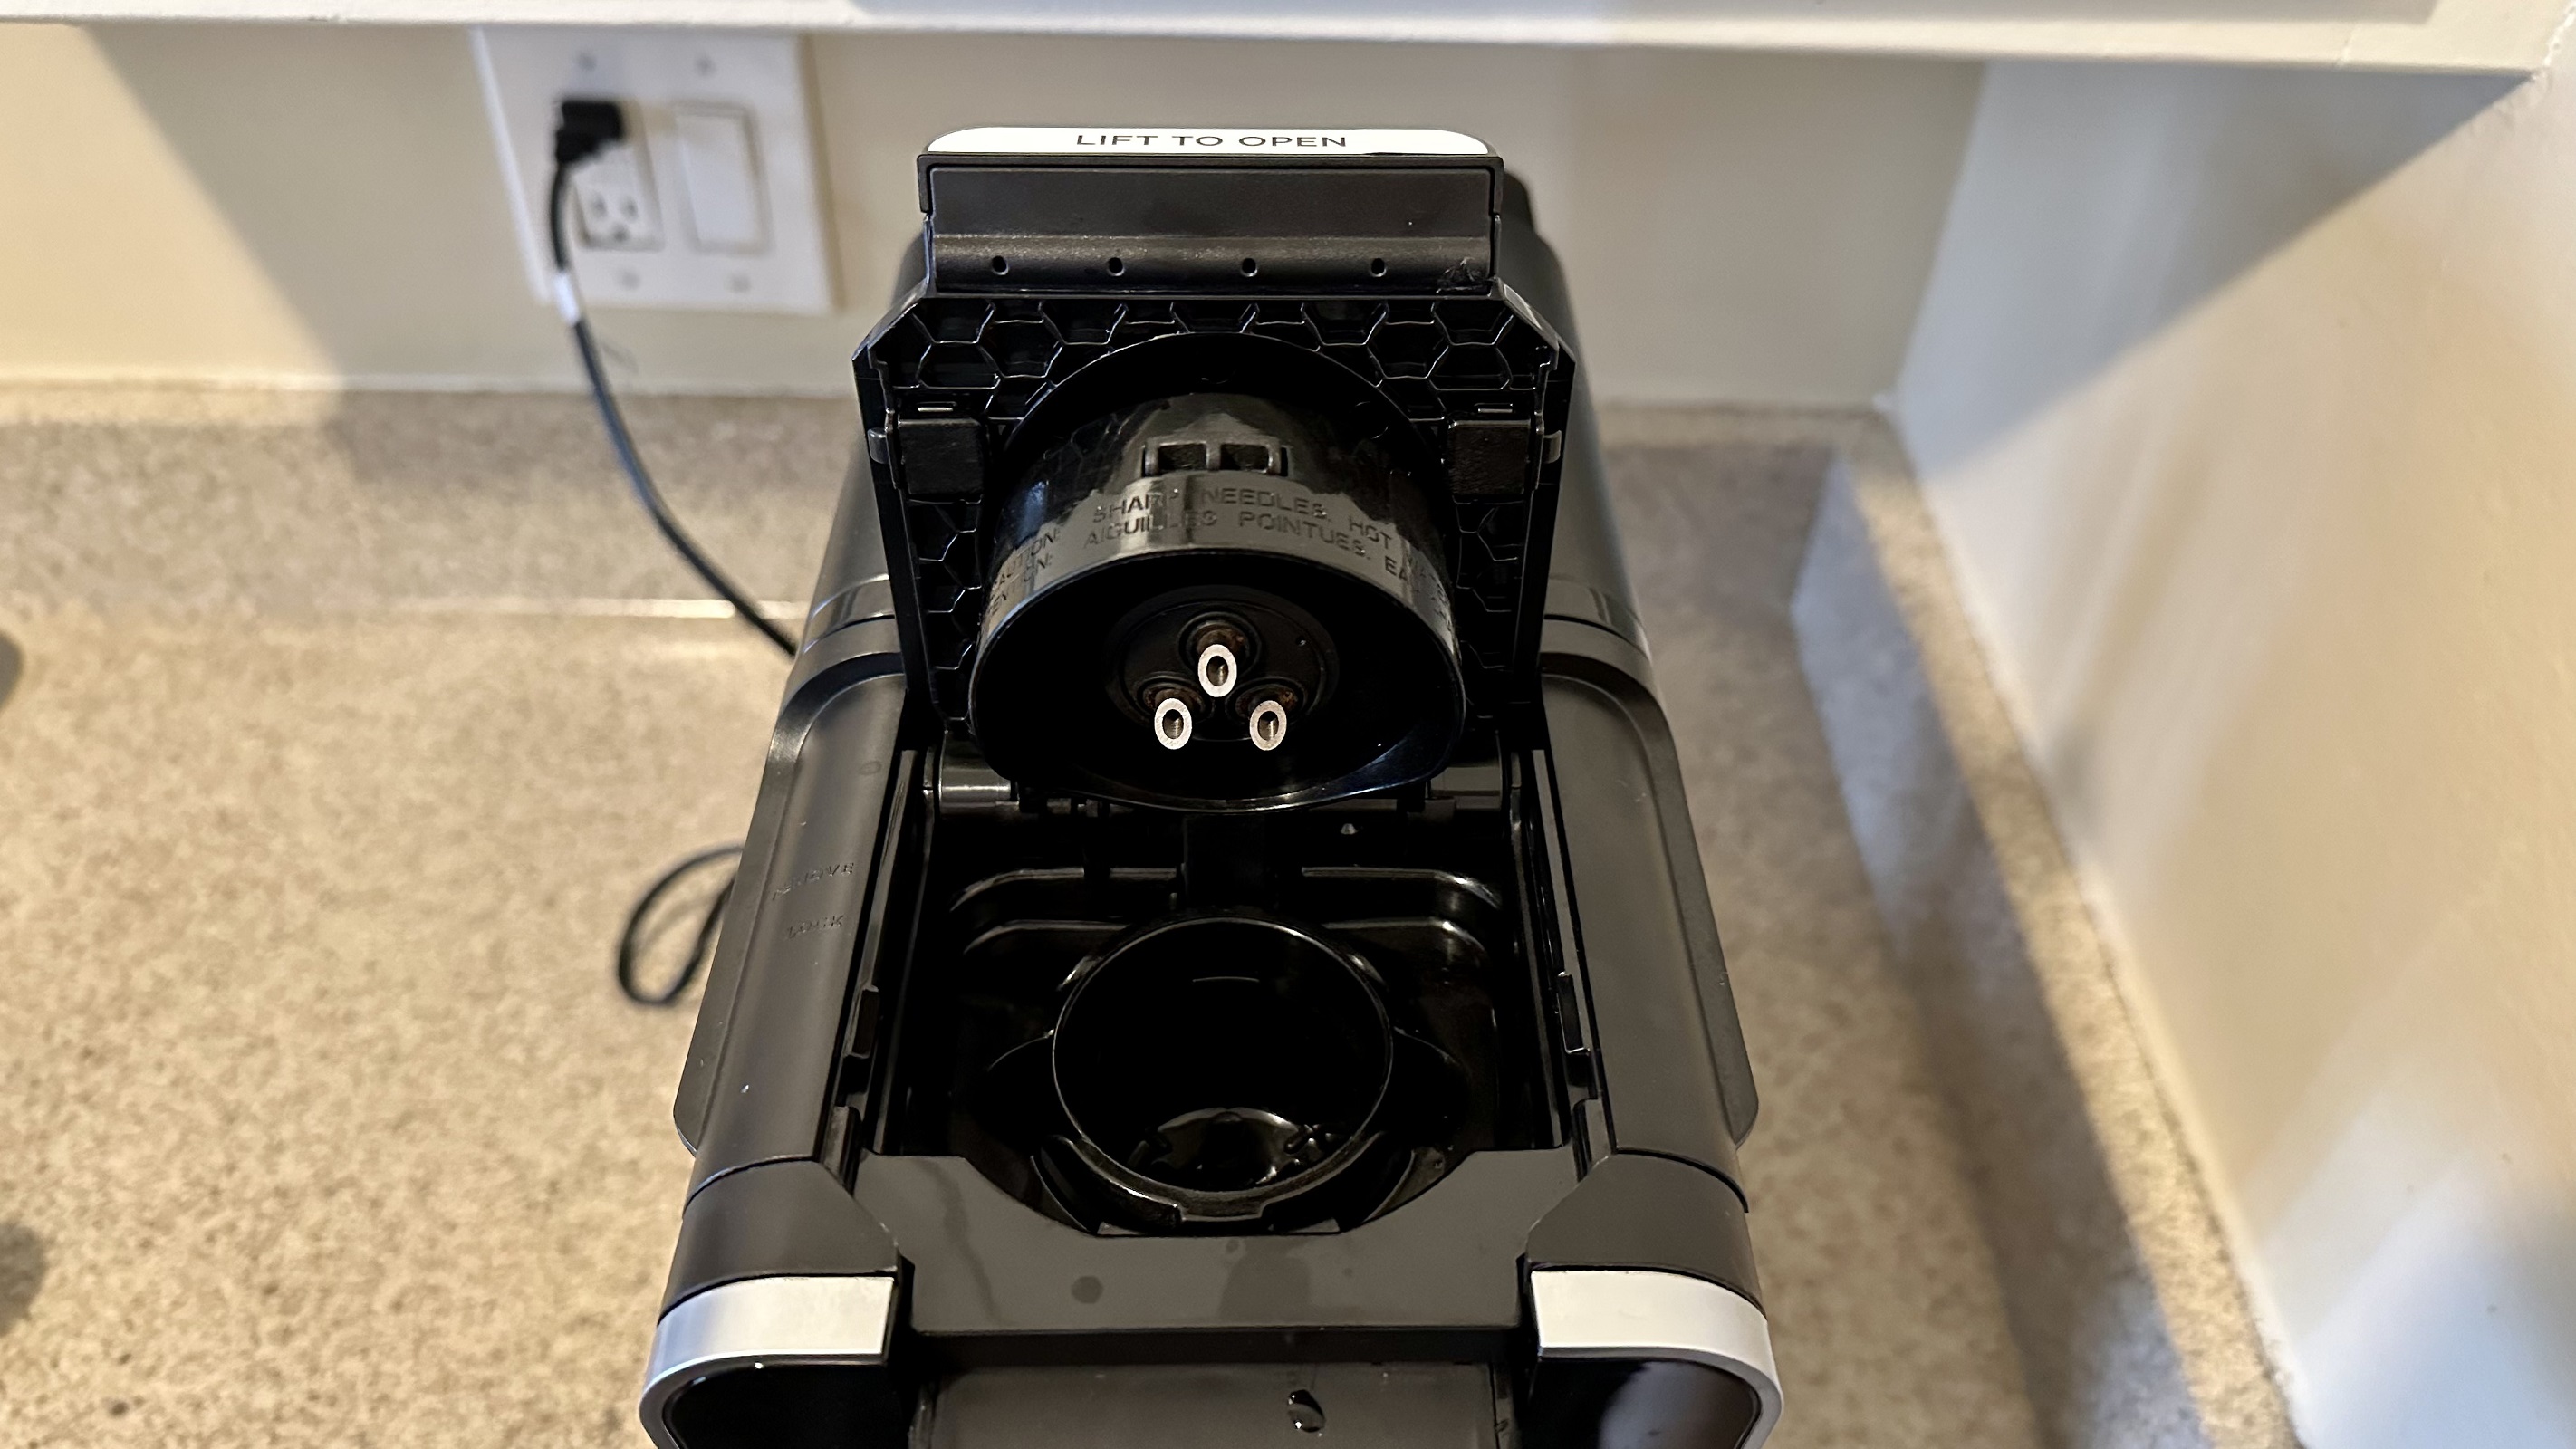 K-cup adapter installed